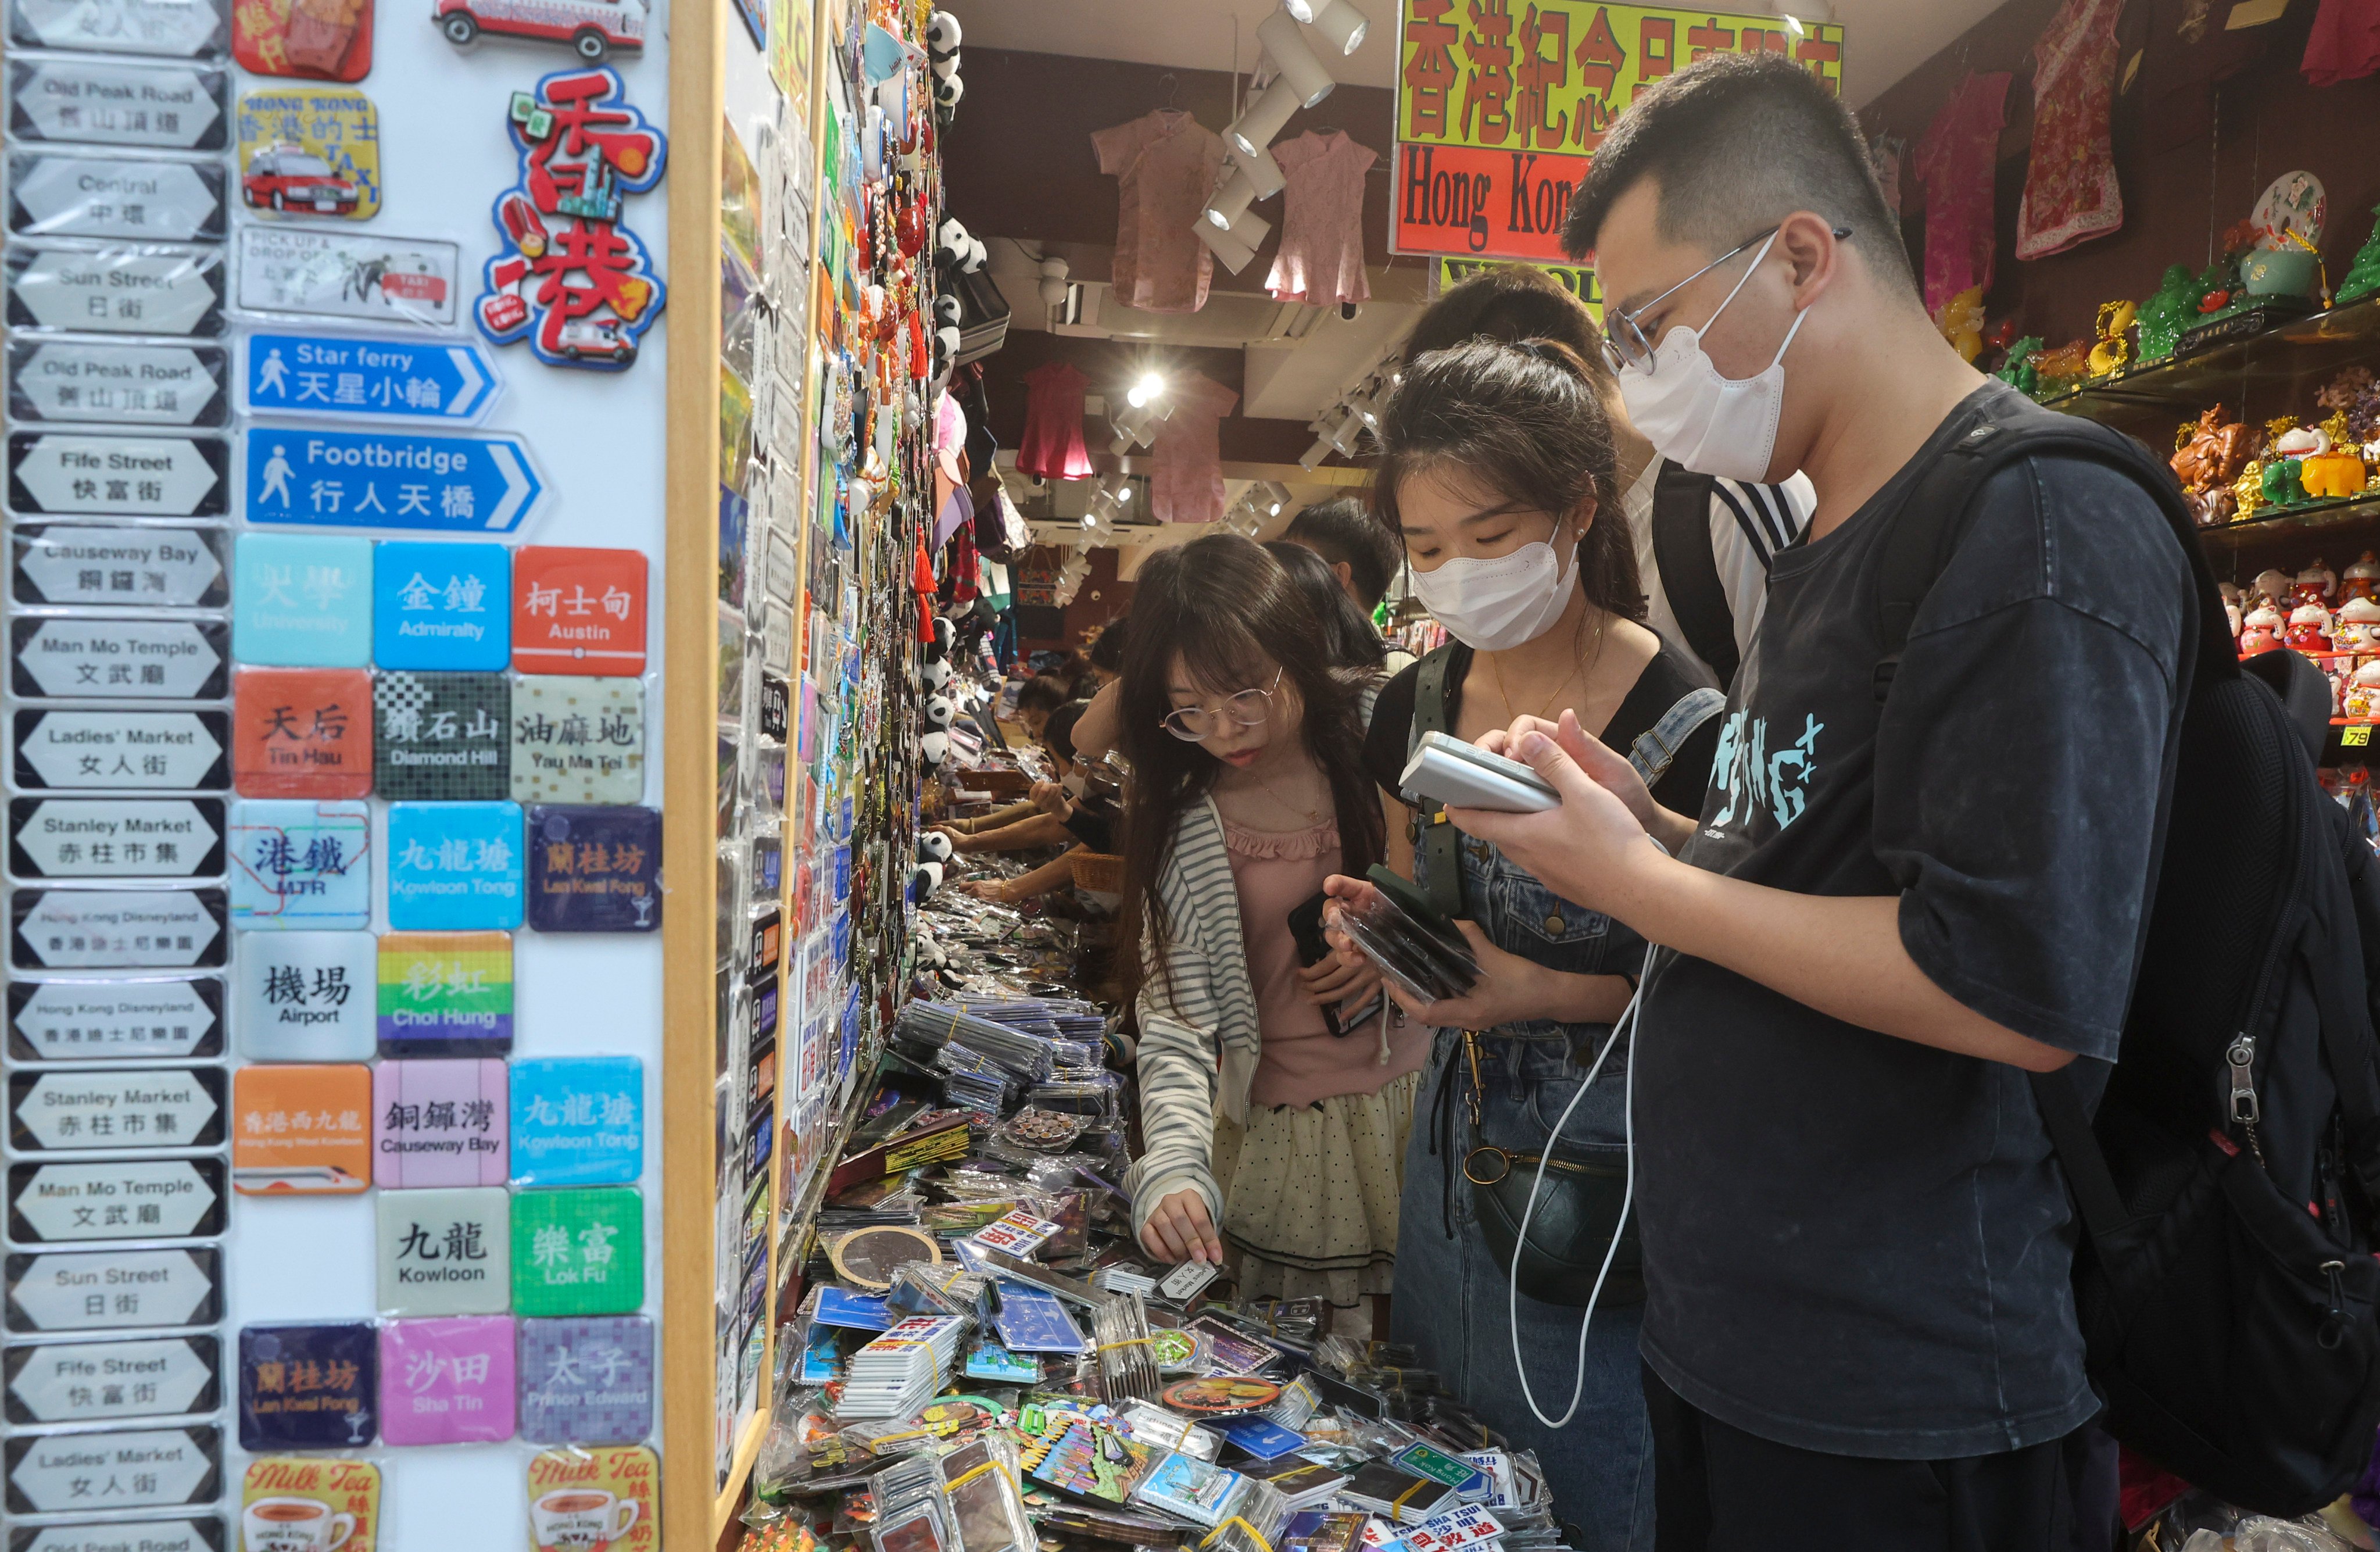 Tourists buy souvenirs in Tsim Sha Tsui. The city’s tourism sector could feel the impact of reduced spending by overnight visitors, according to a government forecast. Photo: Edmond So